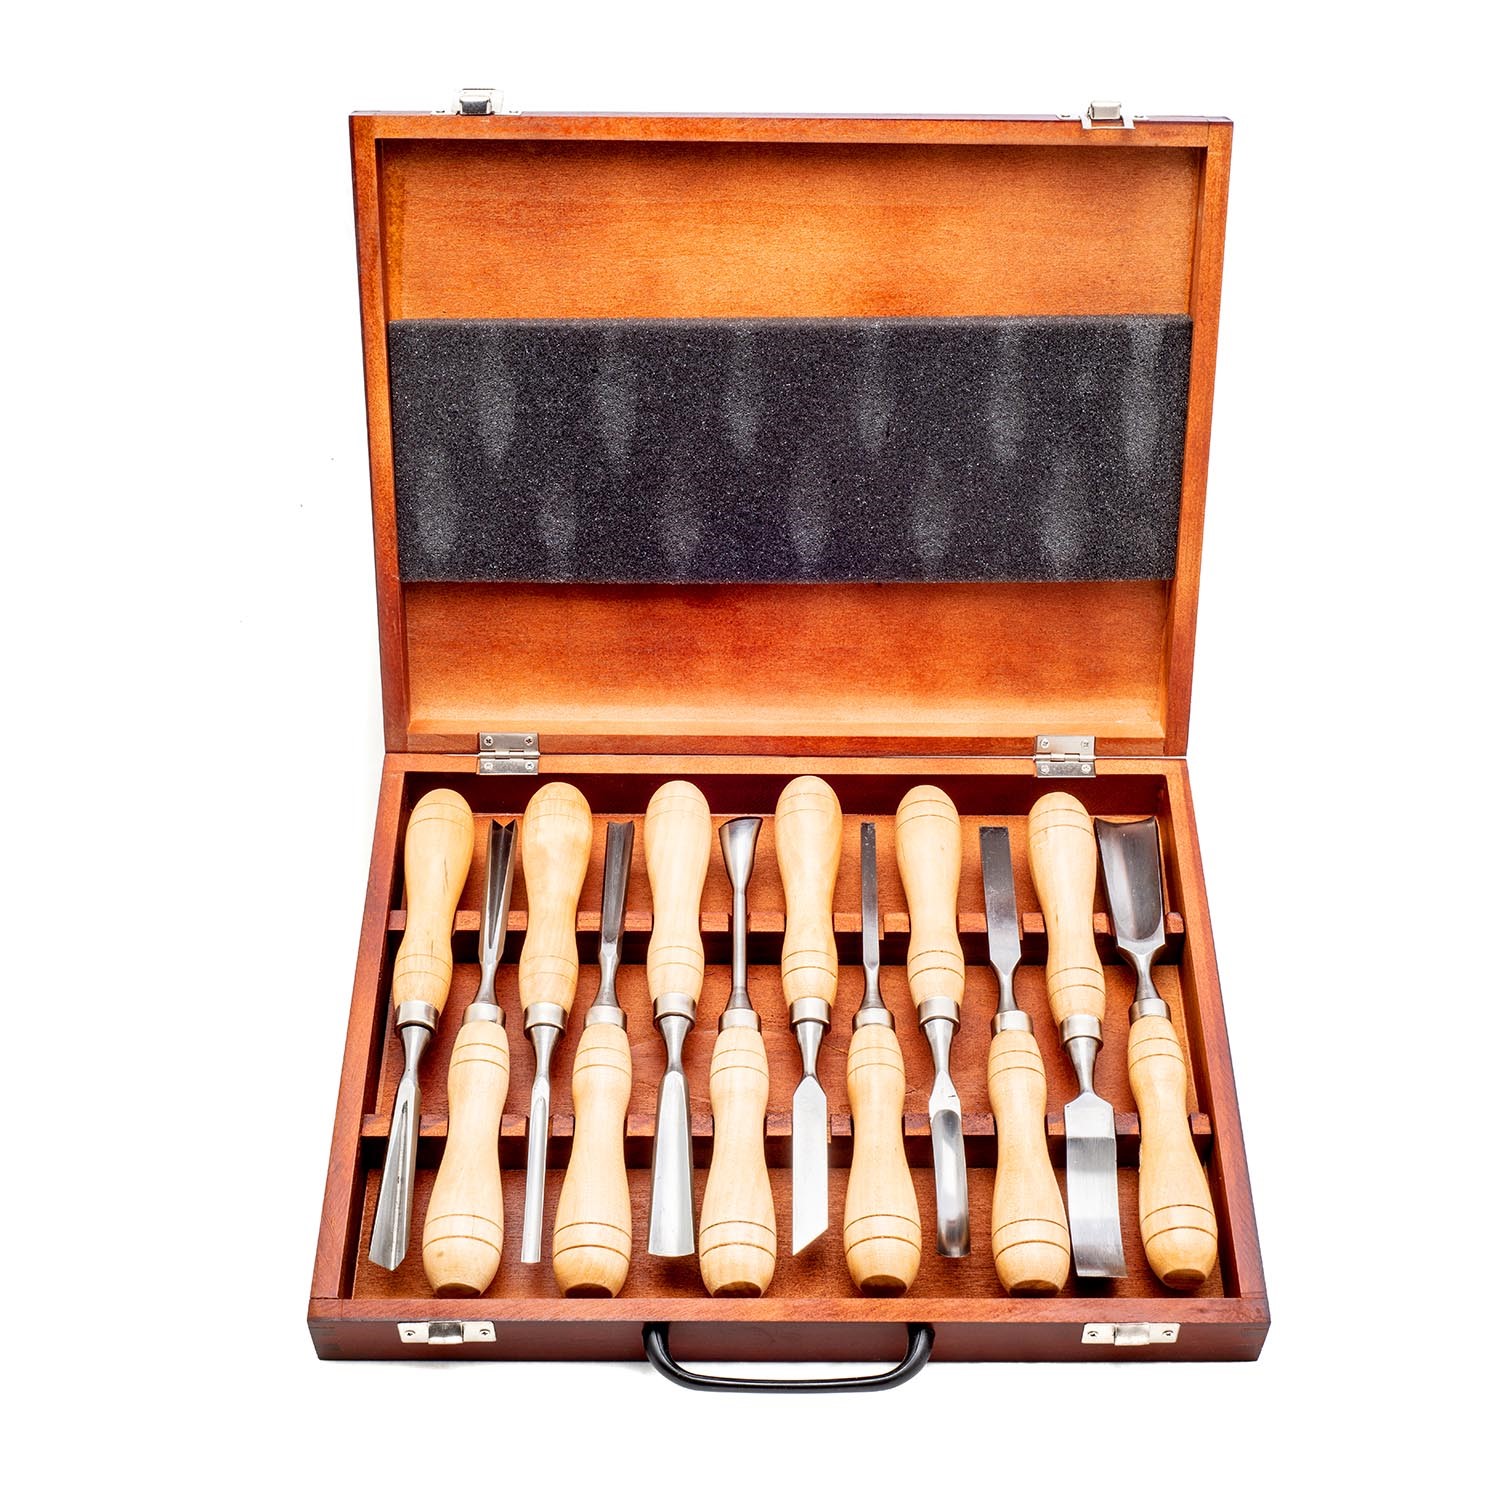 Elemental Tools Wood Carving Tools Kit: Complete With Whittling